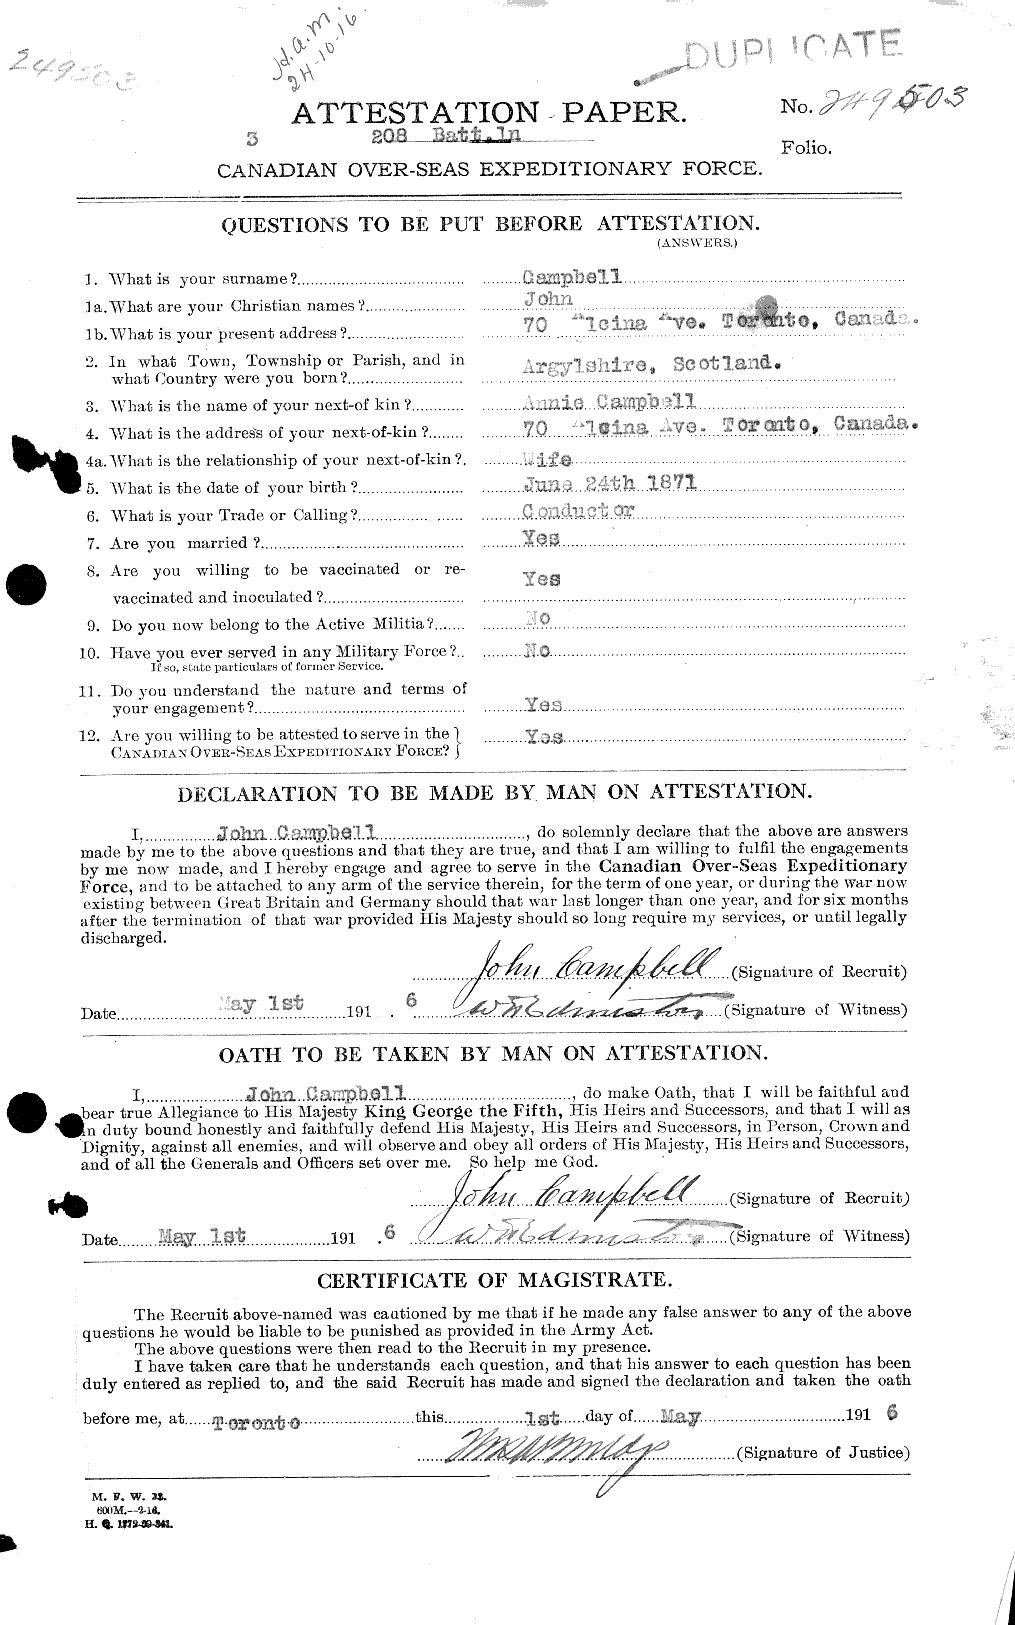 Personnel Records of the First World War - CEF 006822a